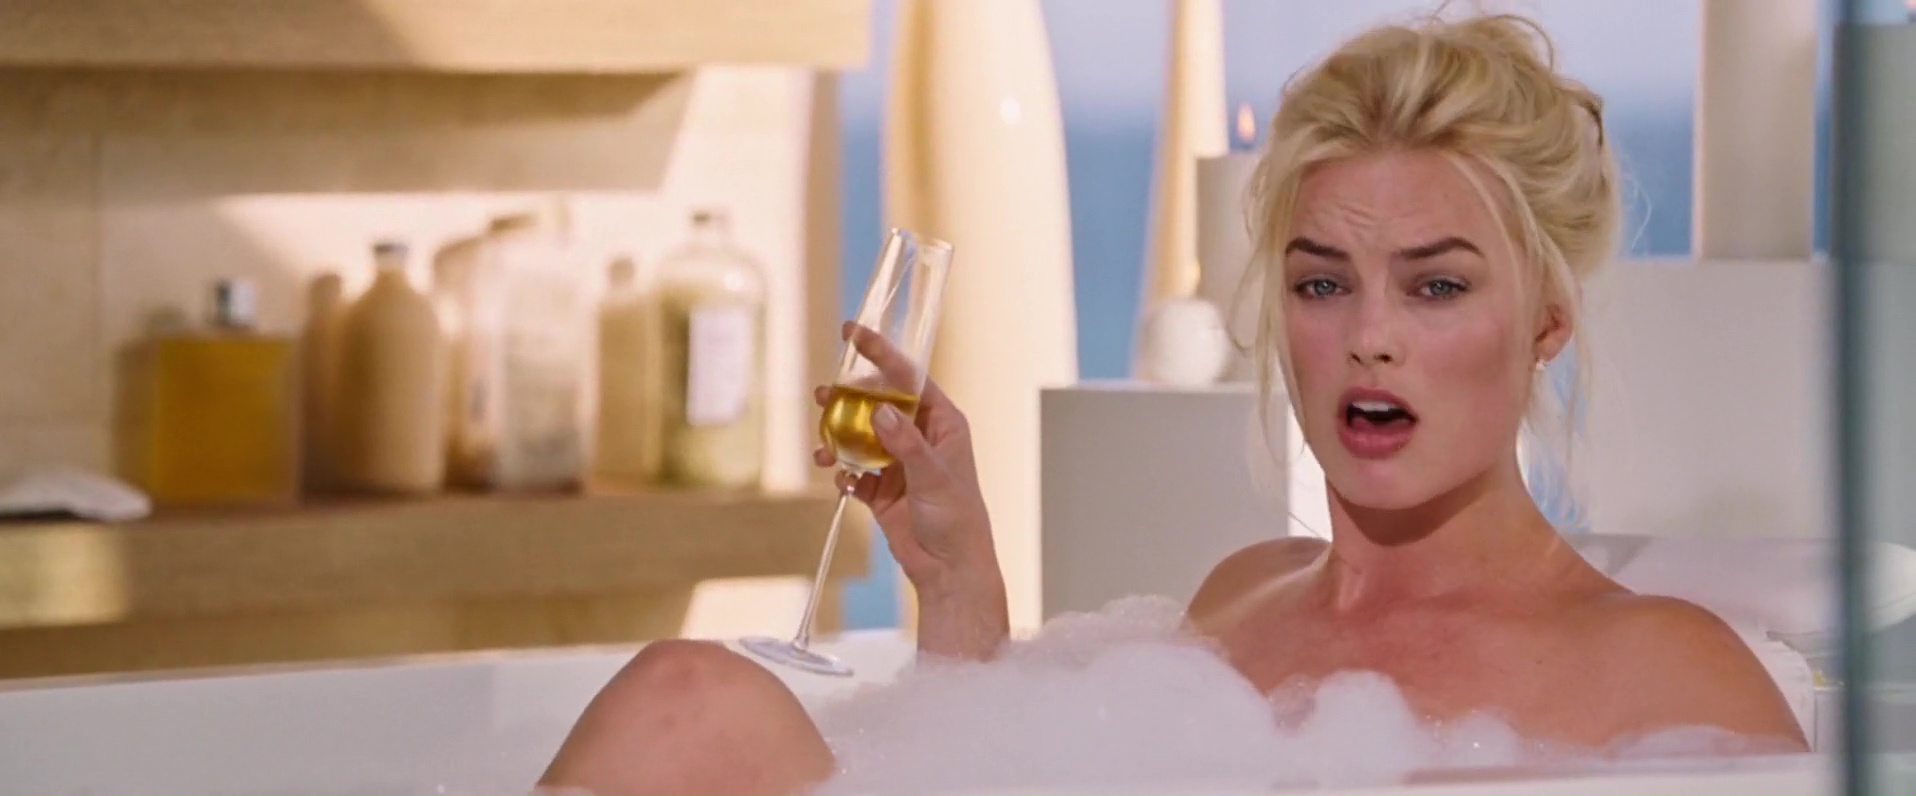 Naked Margot Robbie In The Big Short